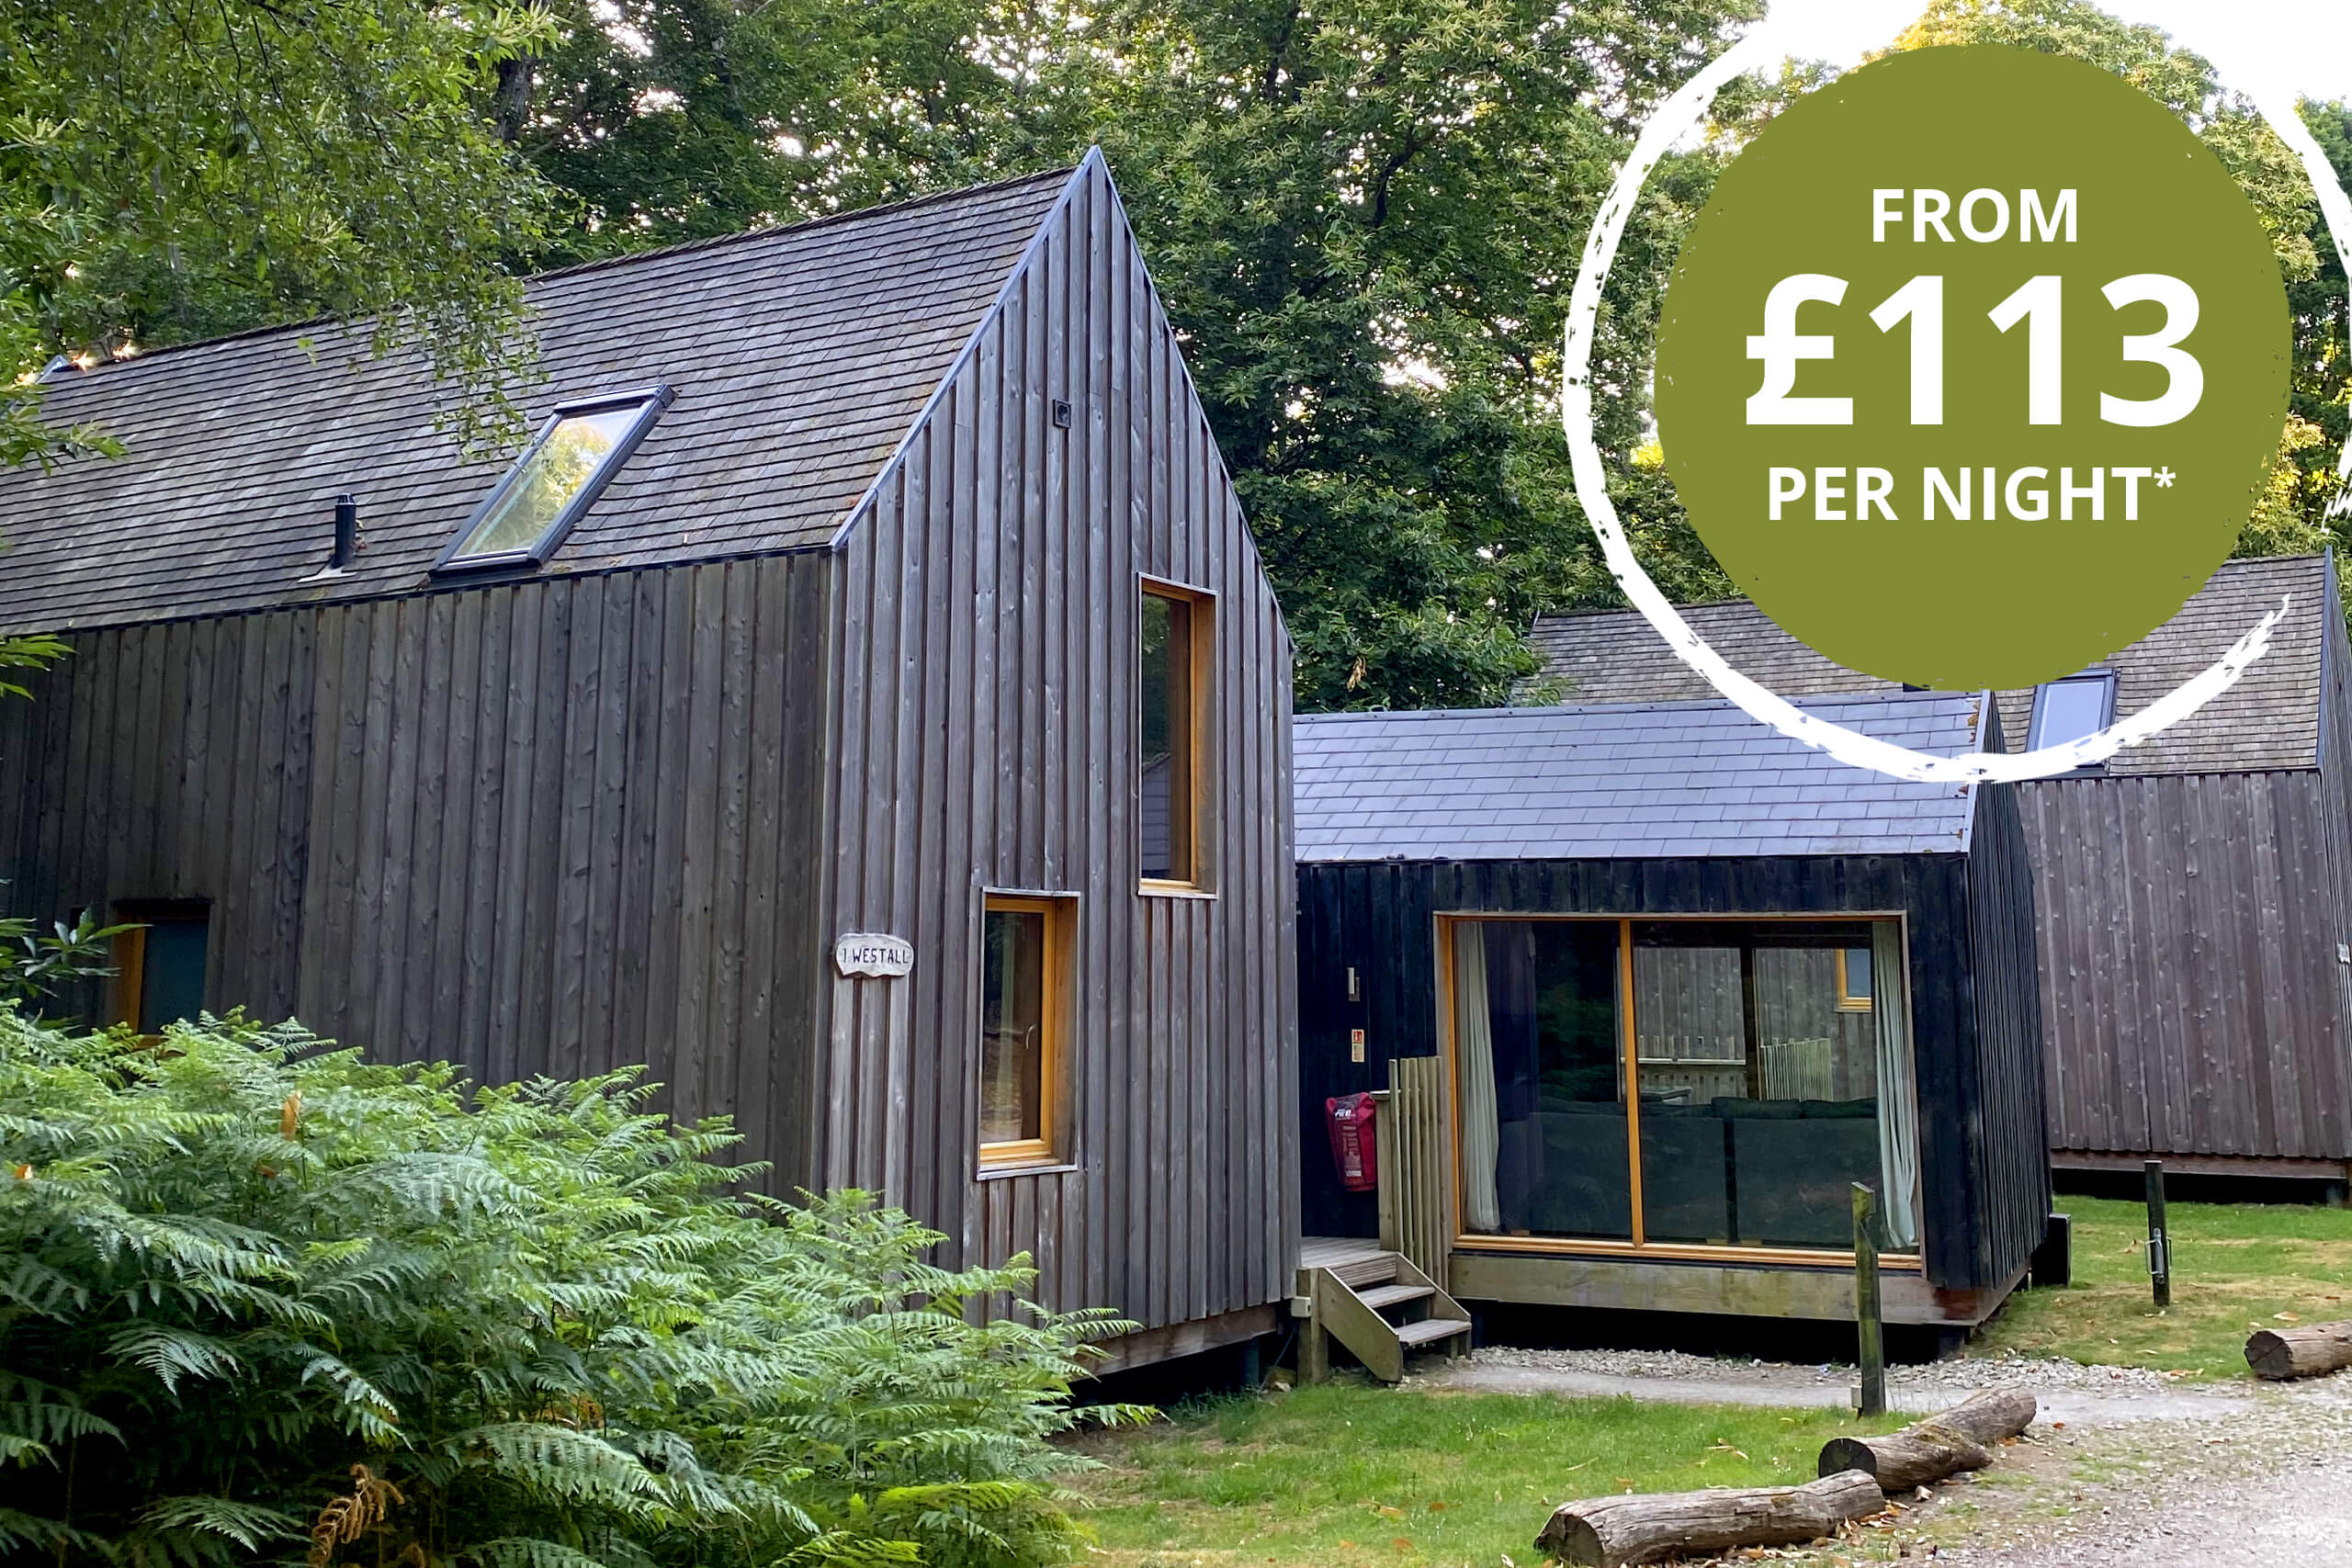 Burnbake forest lodges, available from £113 per night